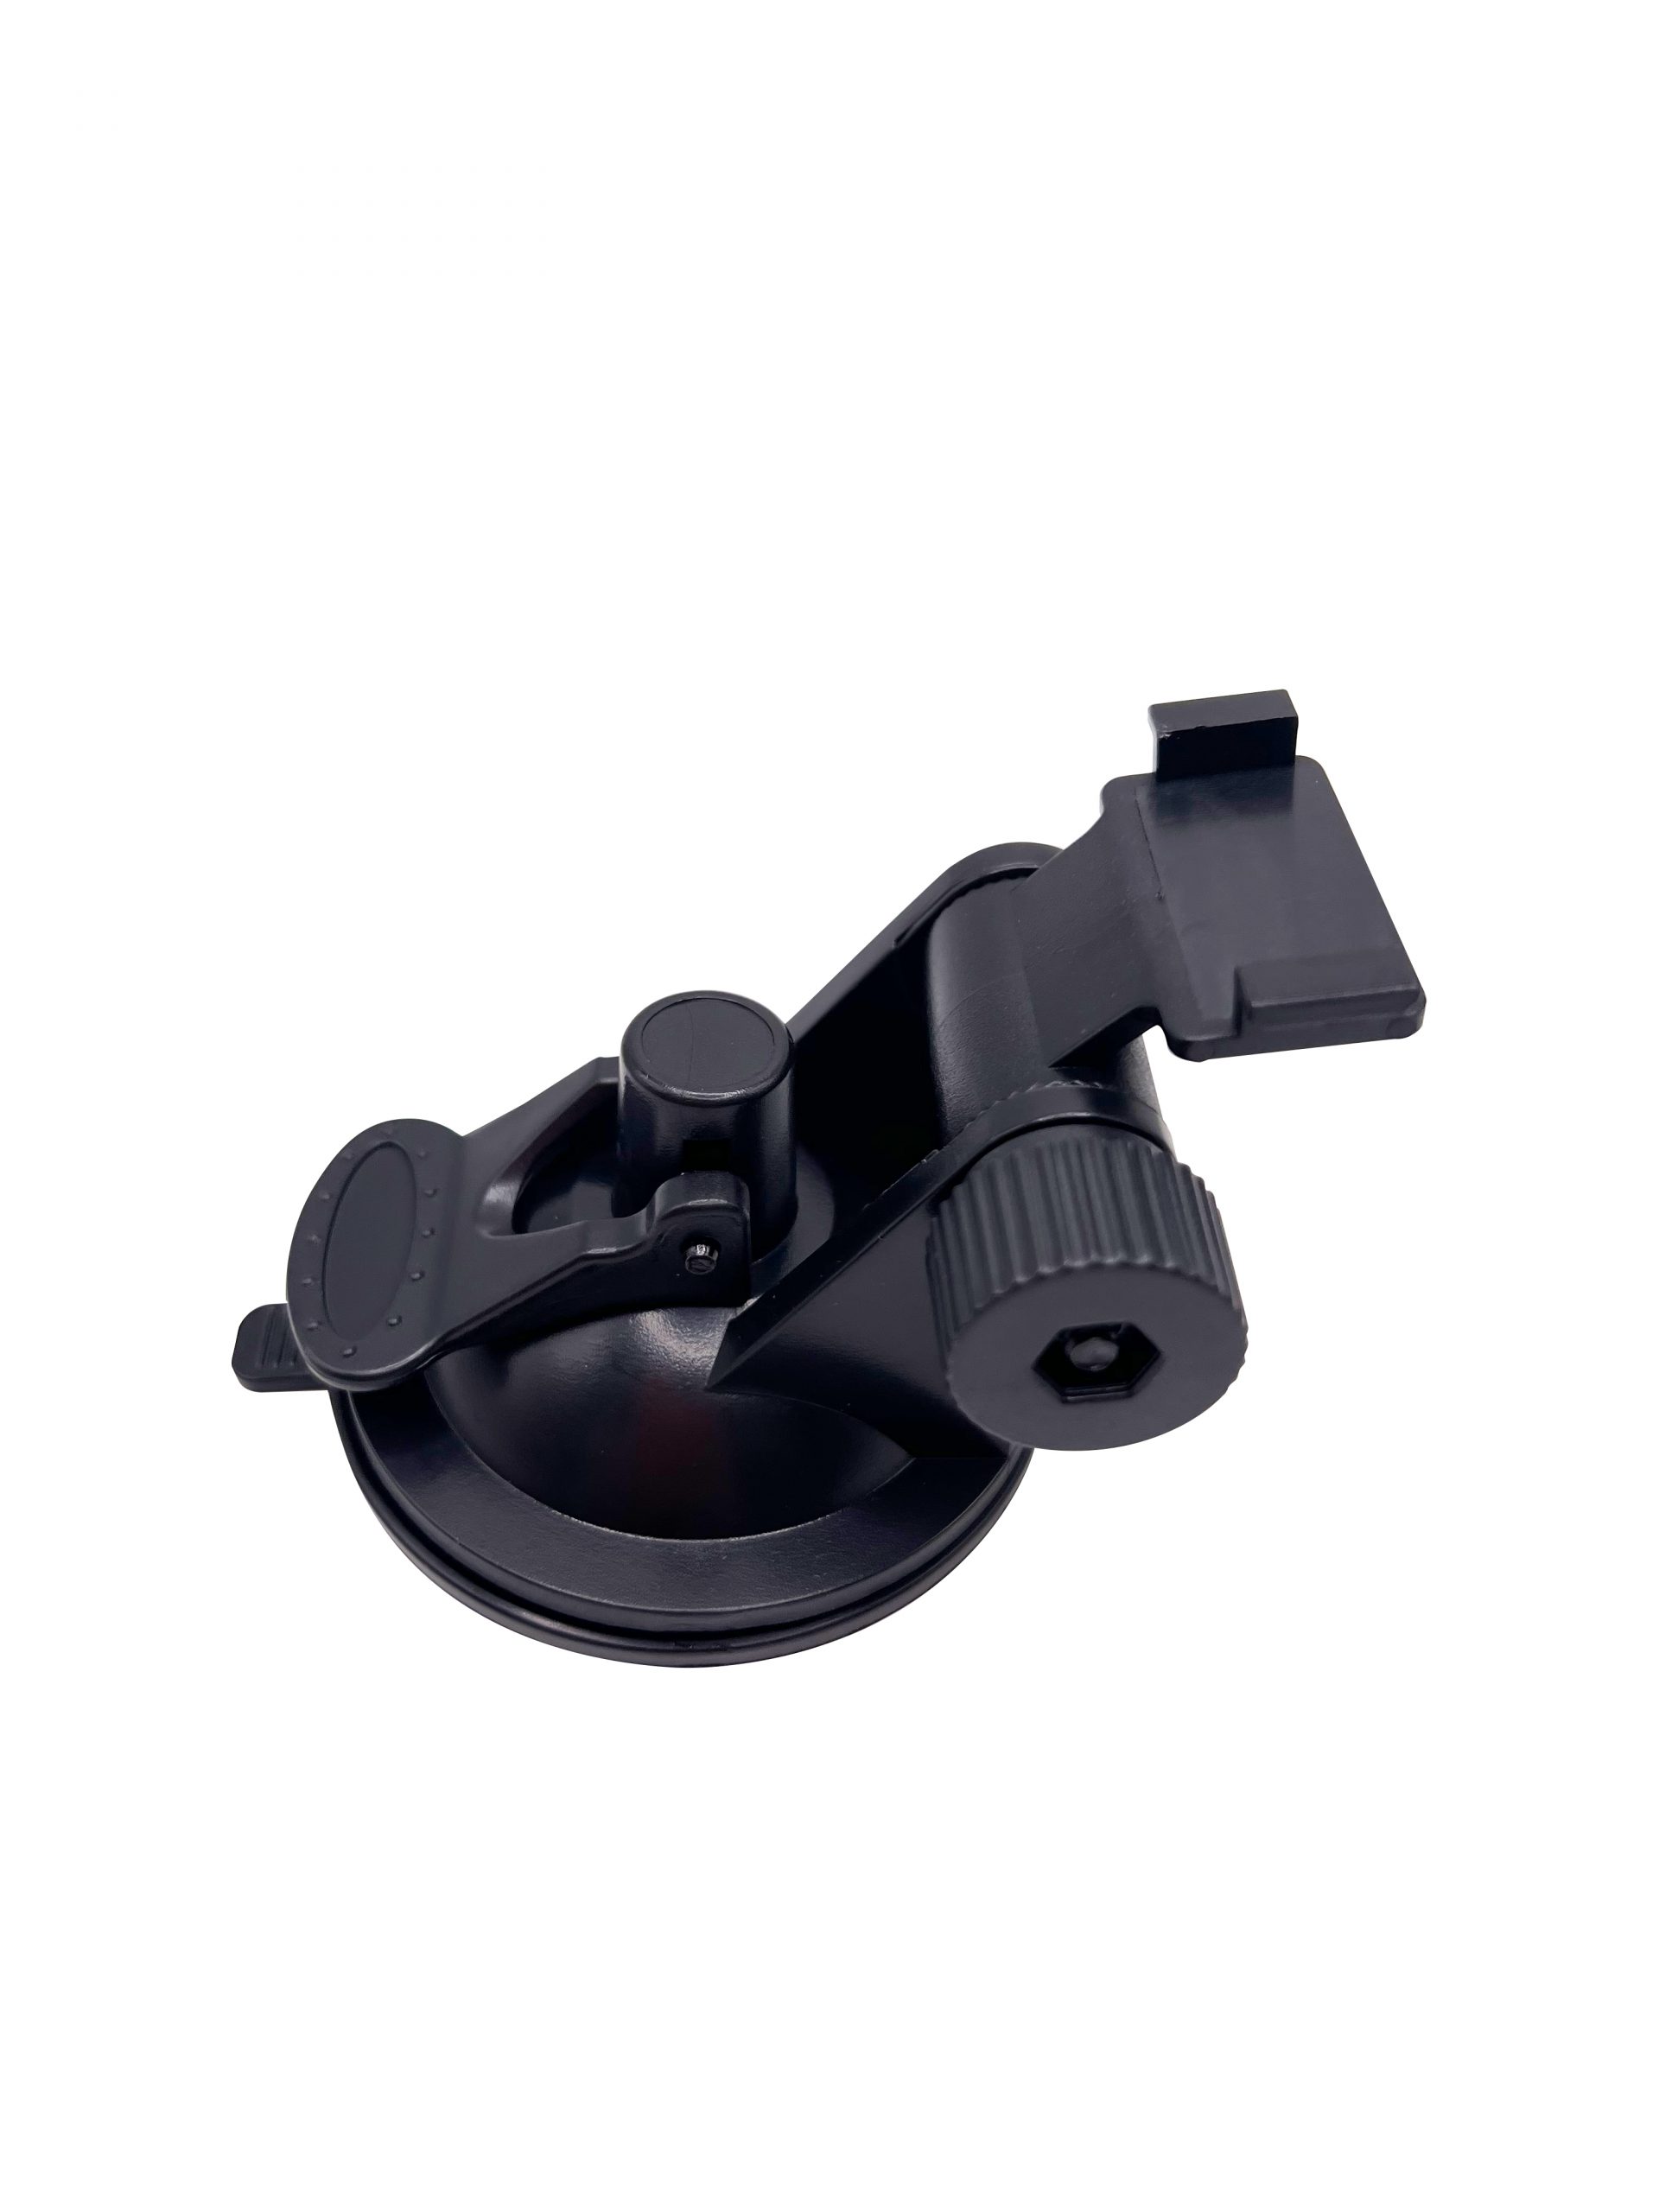 Rexing Suction Cup Mount for S1, S1 Pro, and S3 Dash Cam